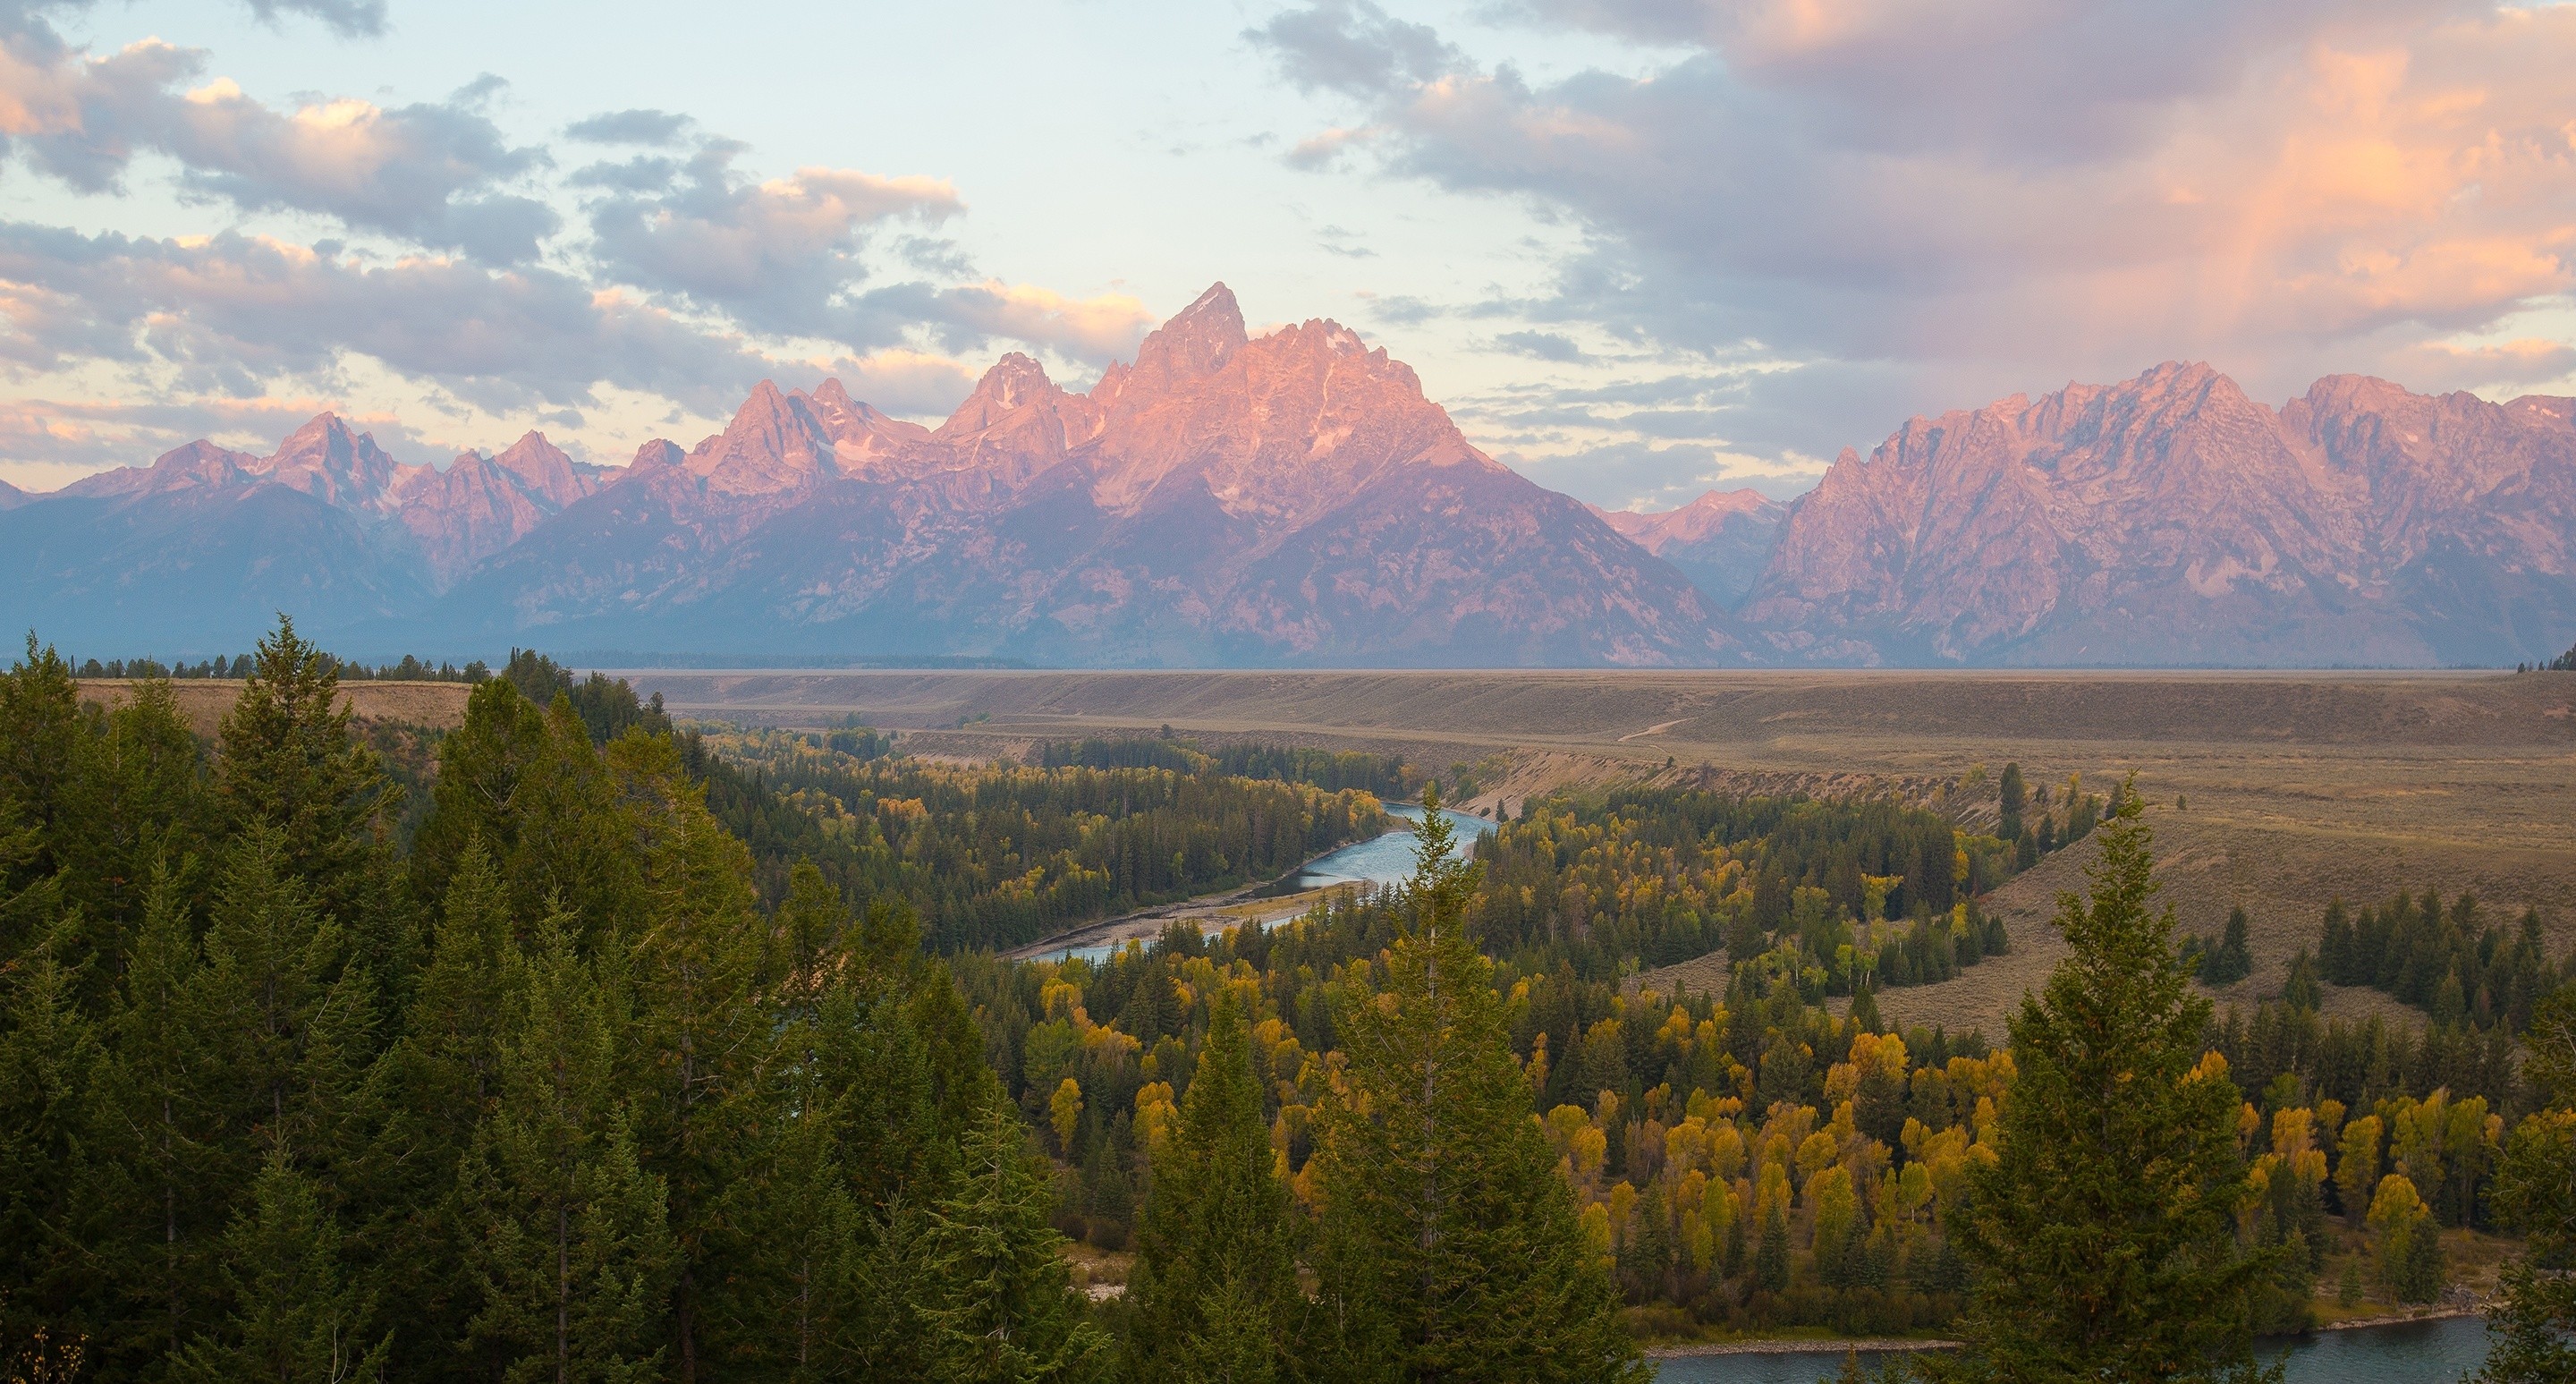 General 2880x1547 nature landscape forest mountains river Snake River overlook Grand Teton National Park Wyoming USA